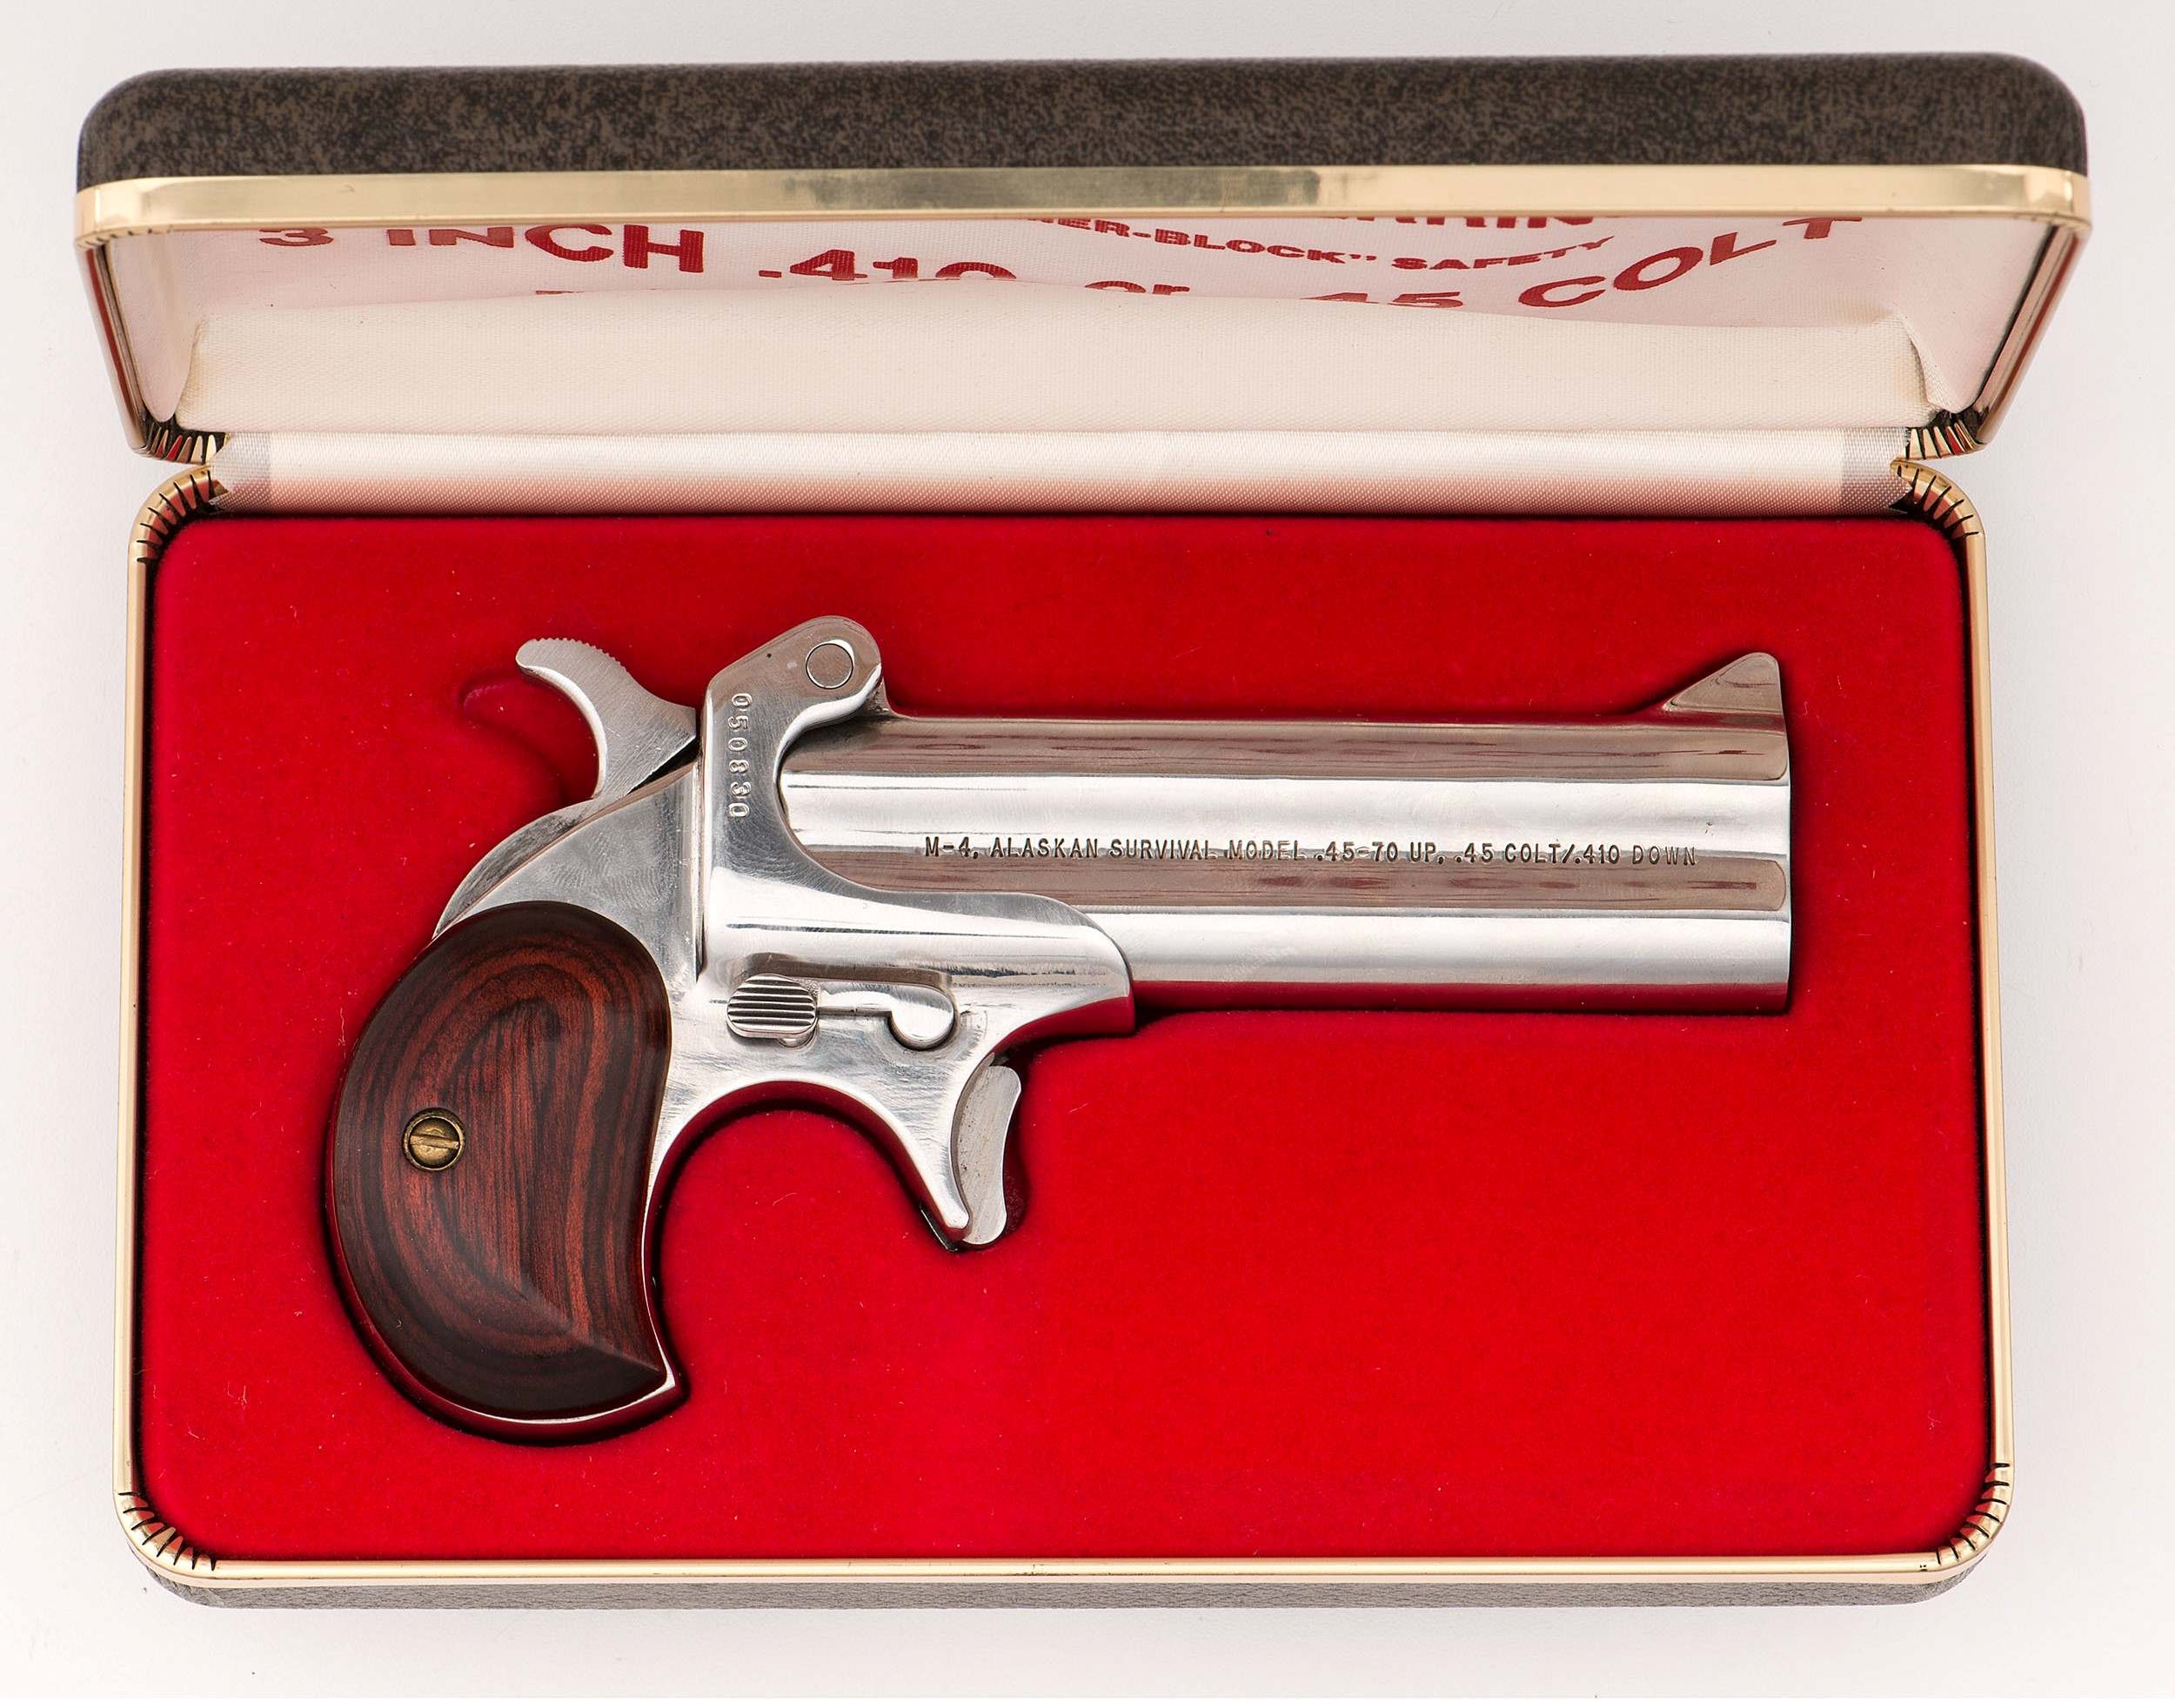 16-facts-about-american-derringer